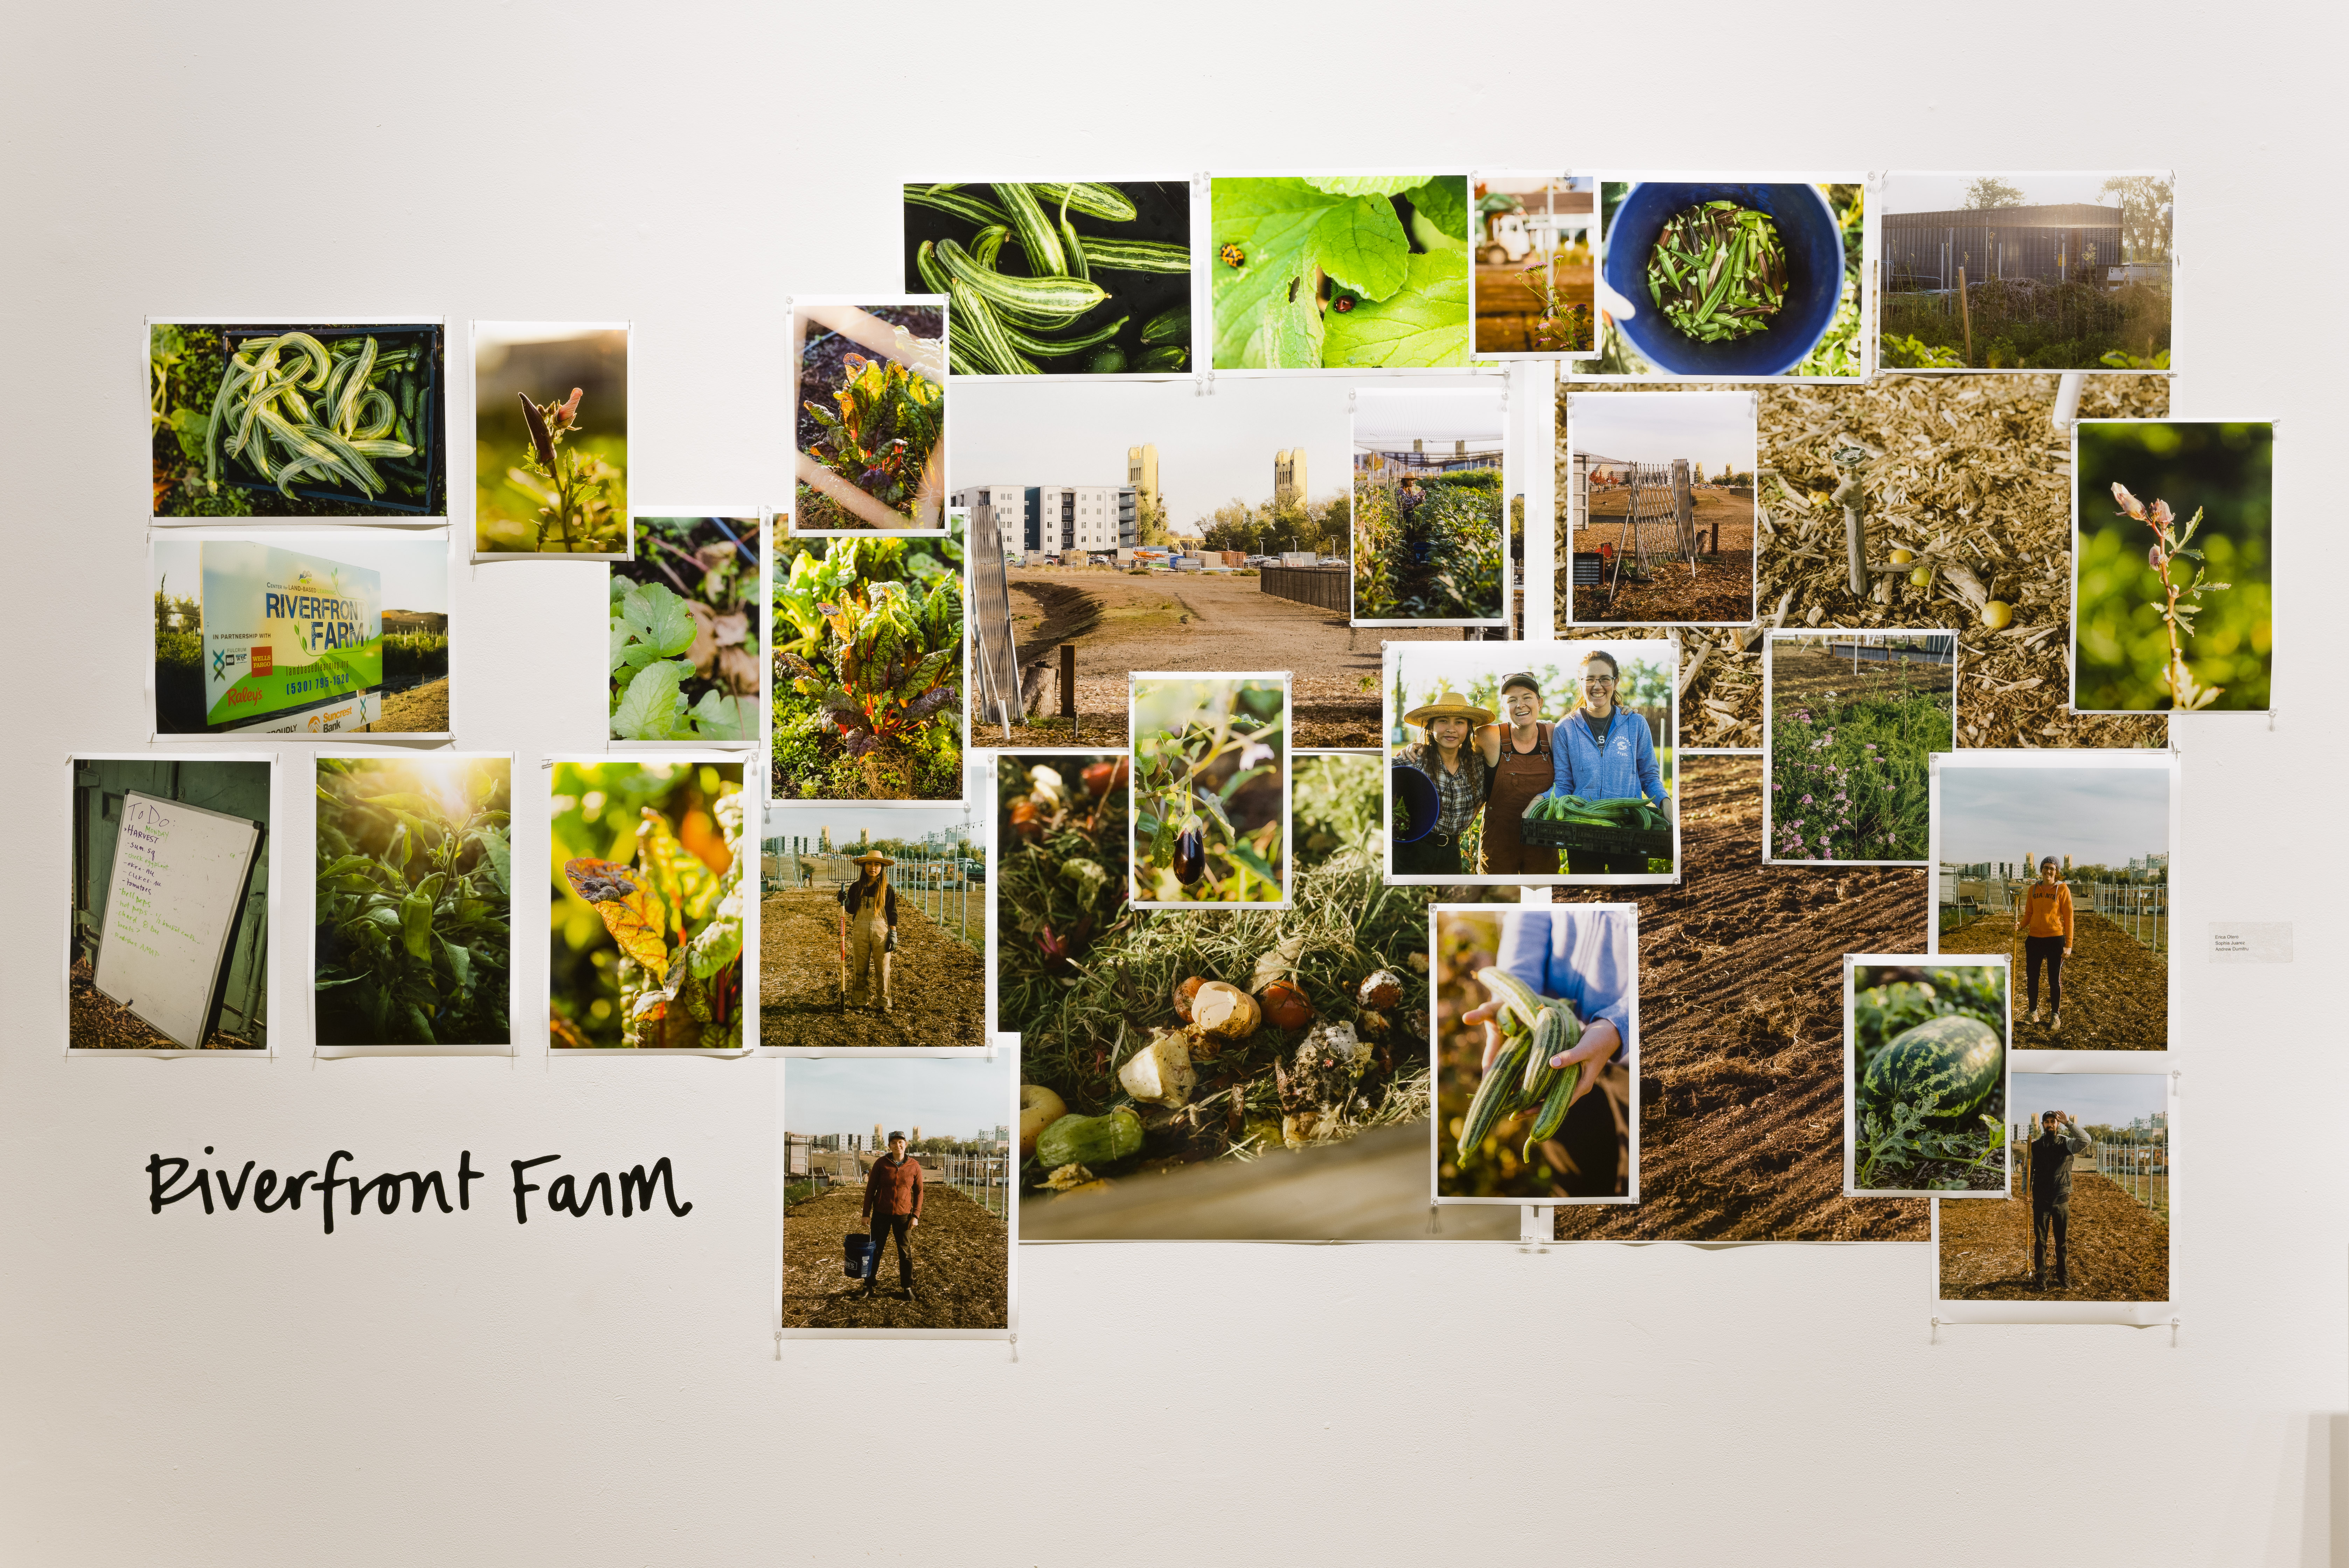 Photos of Riverfront Farm on display in a gallery at Verge Center for the Arts. 